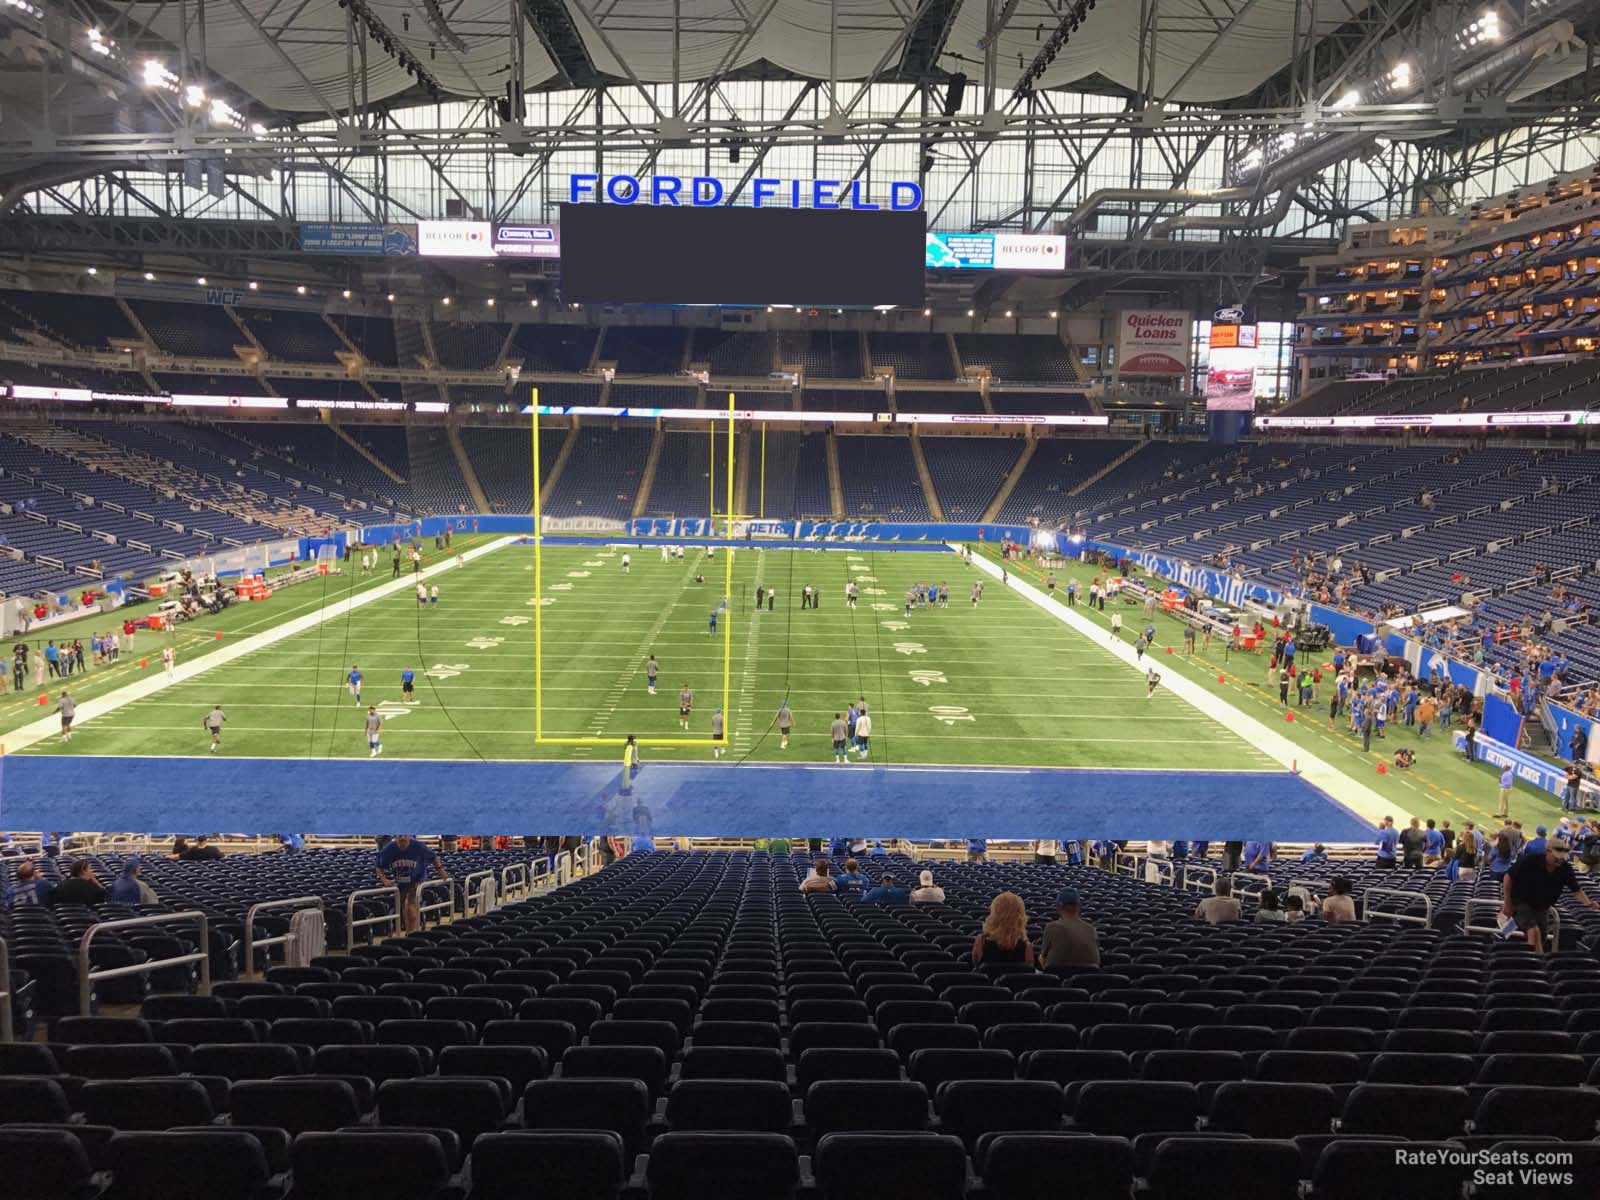 section 138, row 33 seat view  for football - ford field